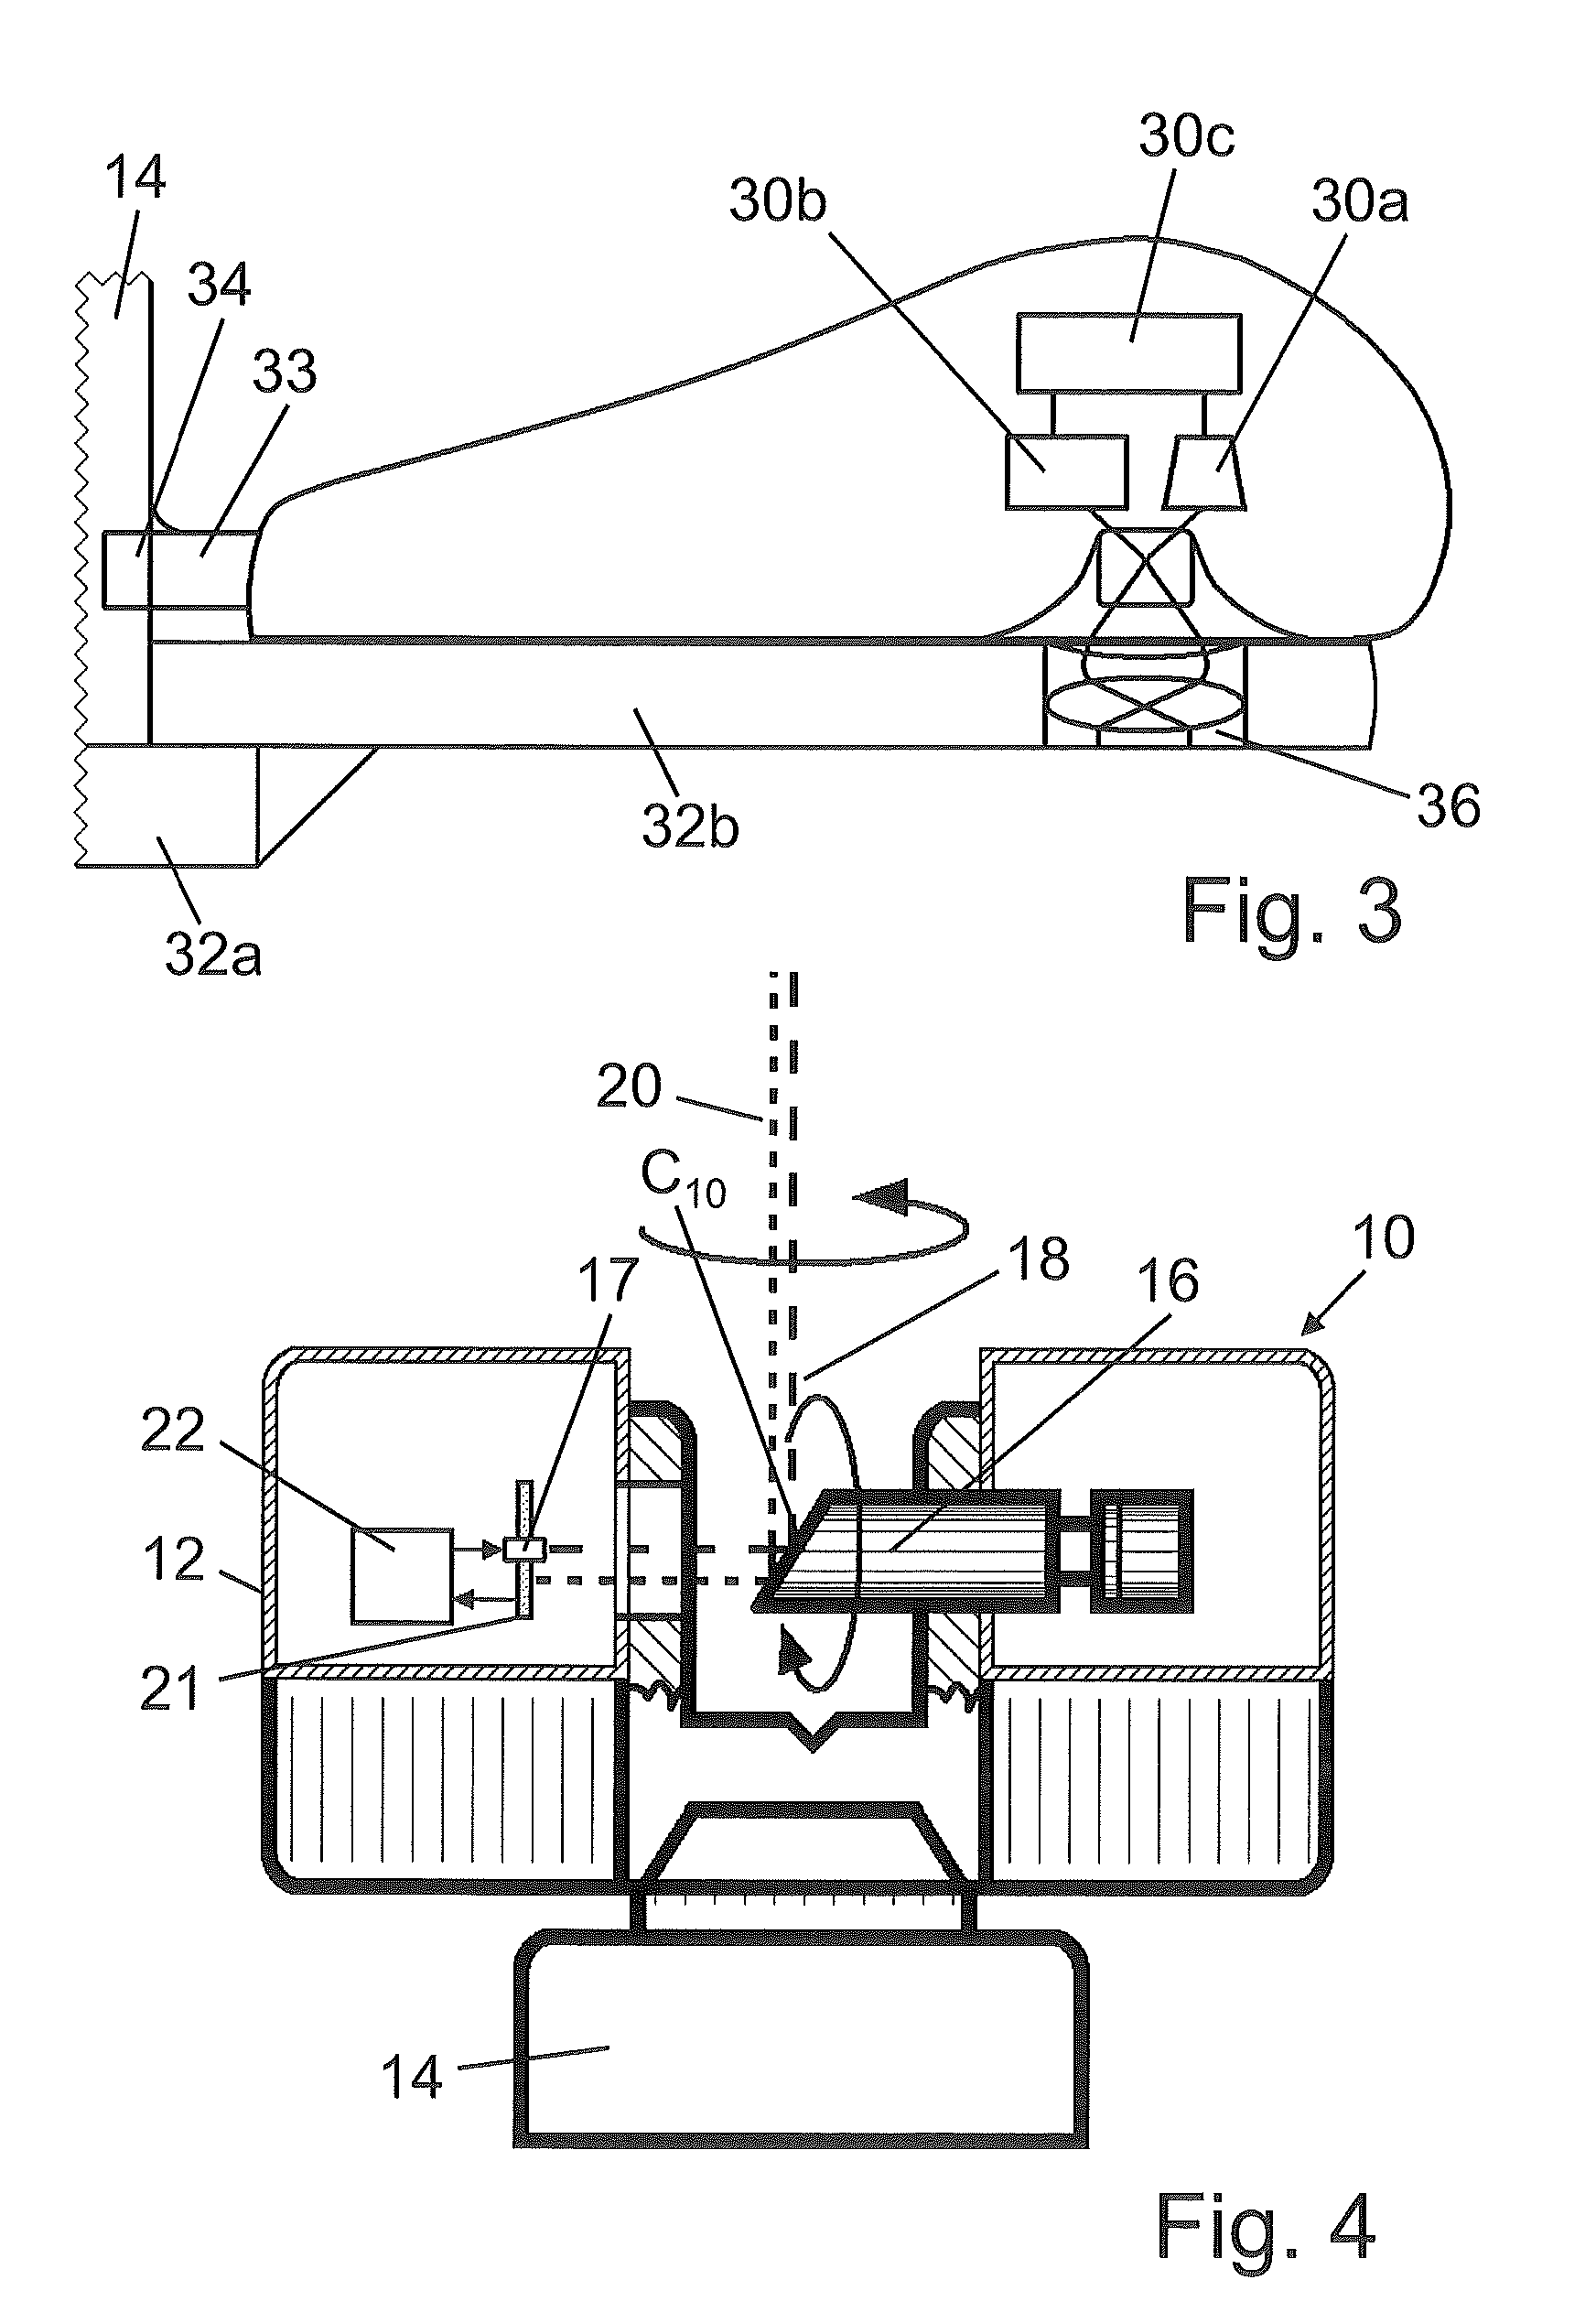 Device for optically scanning and measuring an environment